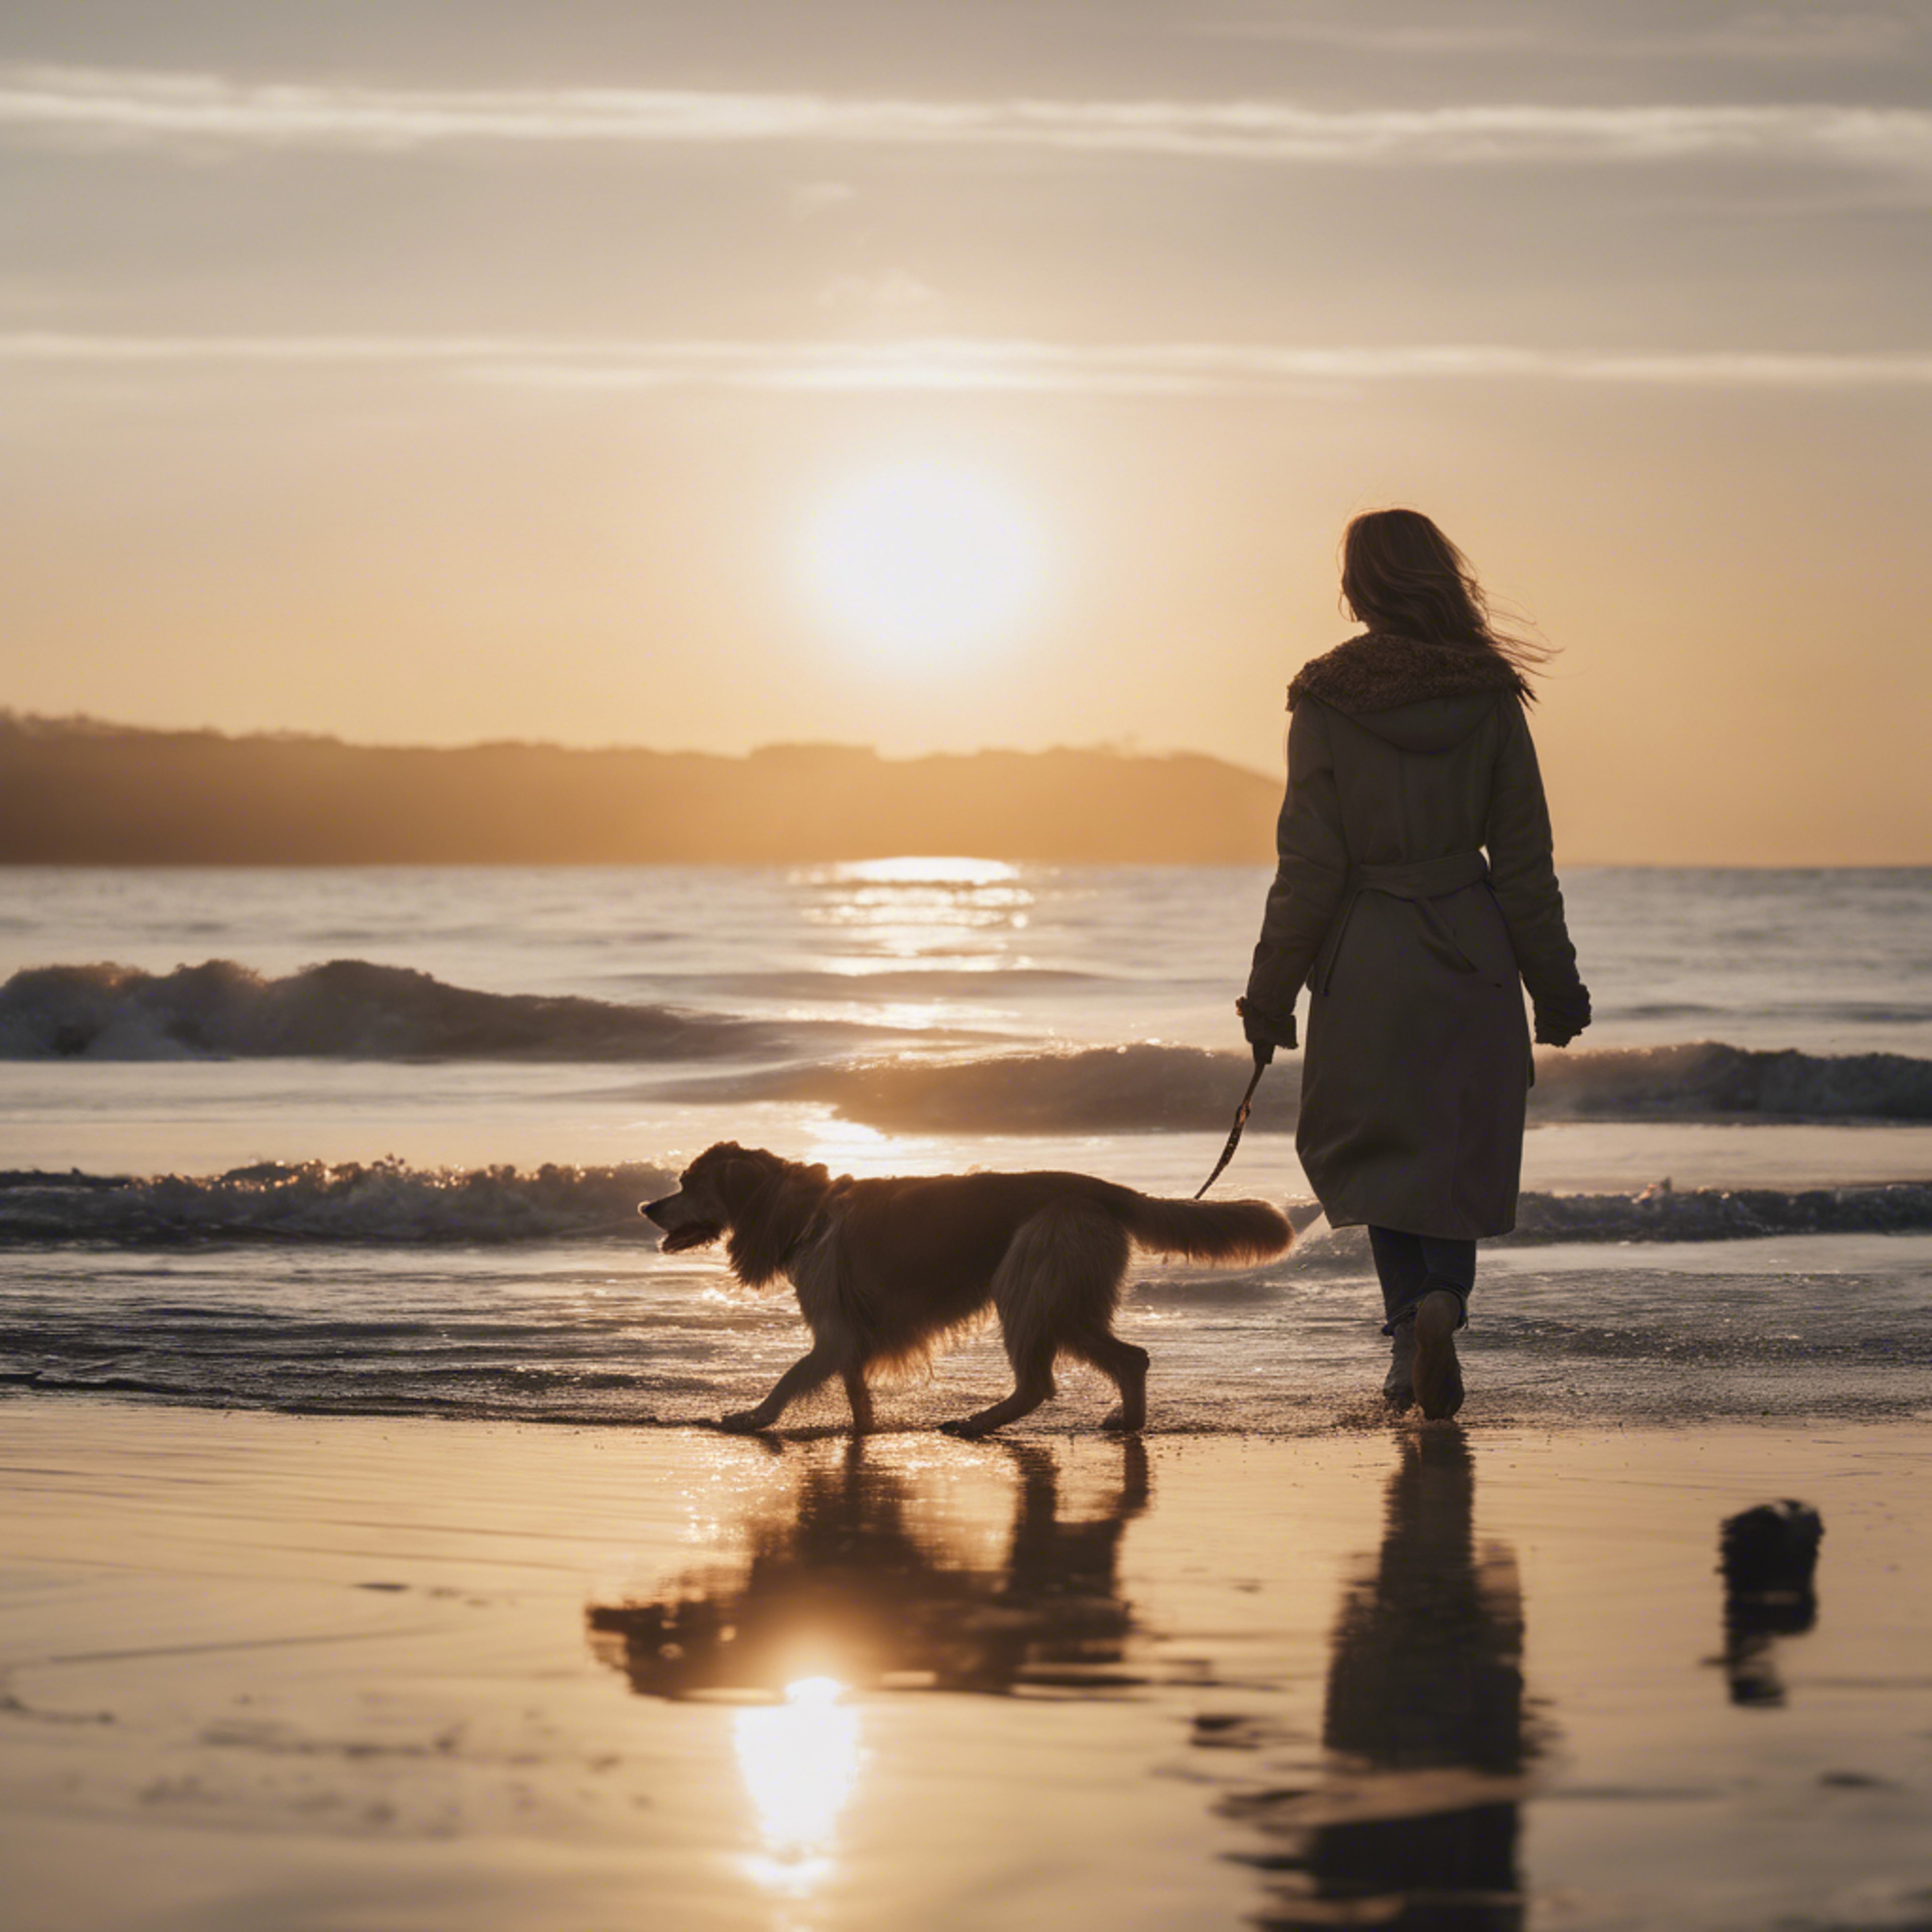 A beach scene with a woman walking her enthusiastic dog along the water's edge at sunset. کاغذ دیواری[f9bc2ab3990f4caba062]